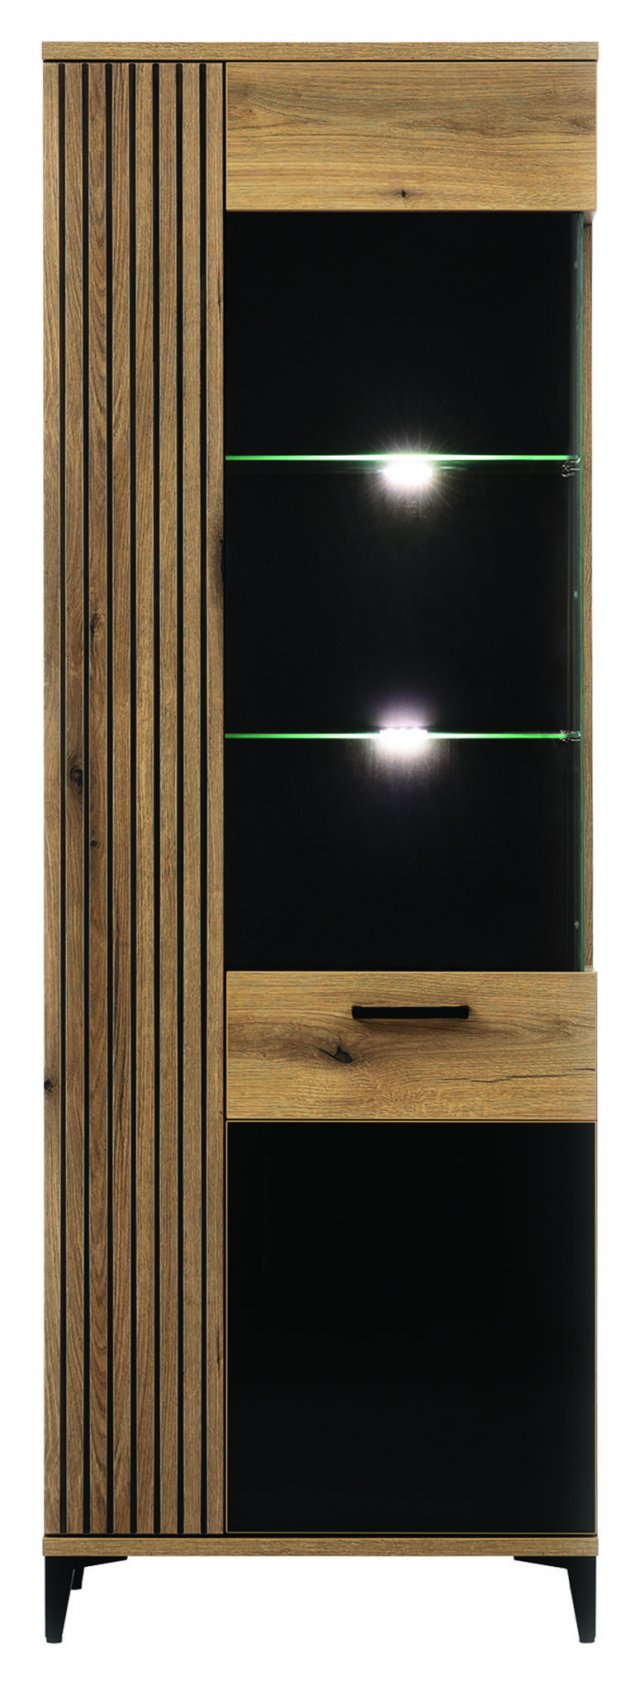 Aris-AS 8 Glass-fronted cabinet